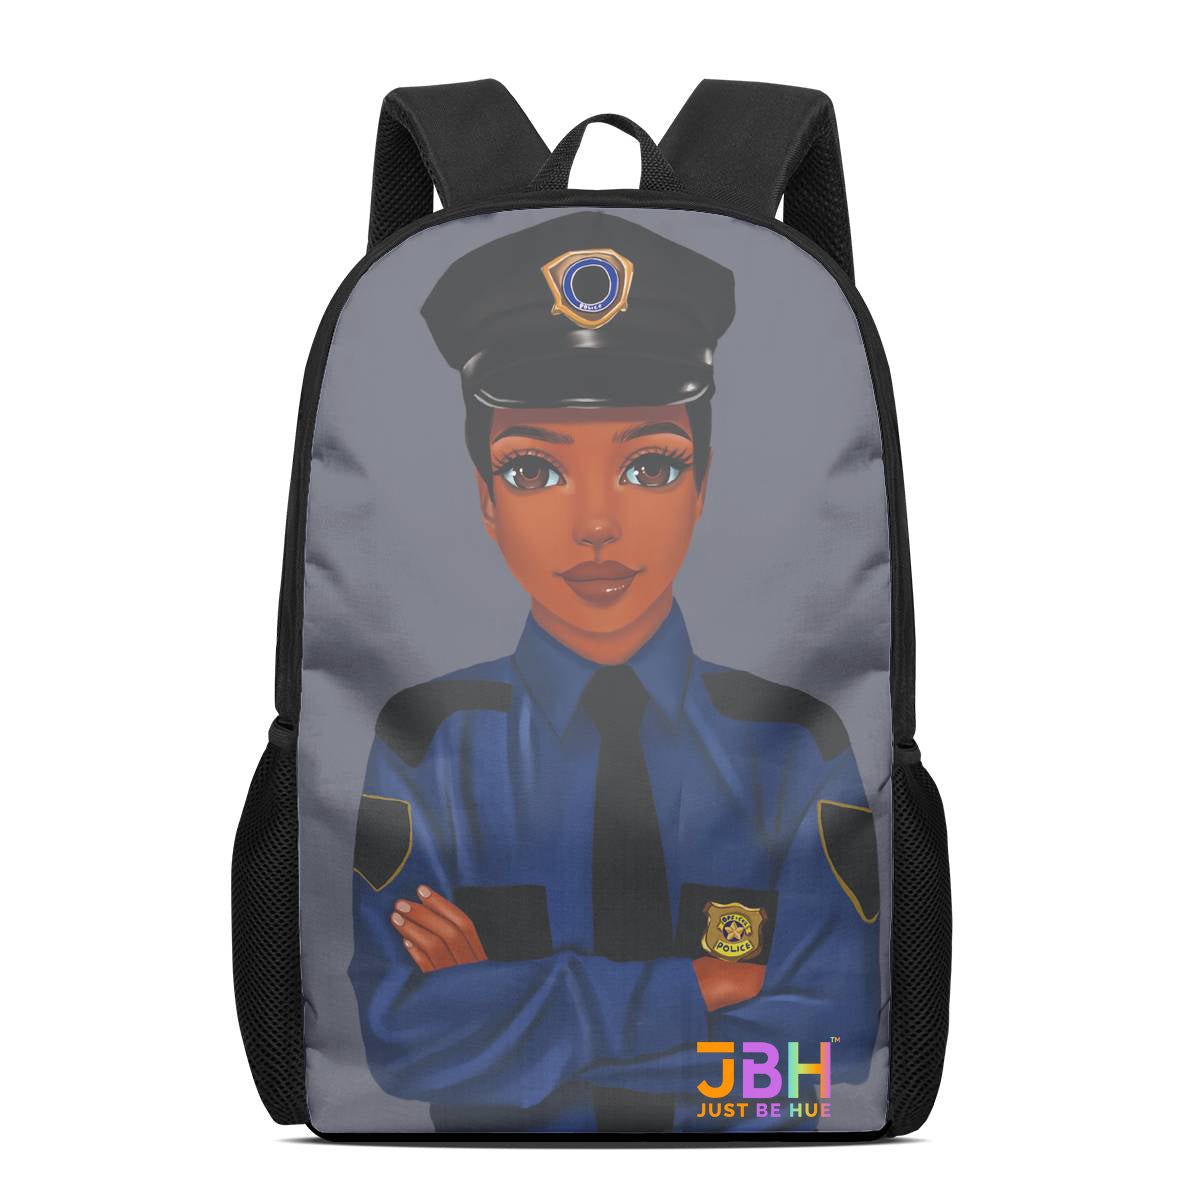 Patrice The Policewoman Backpack